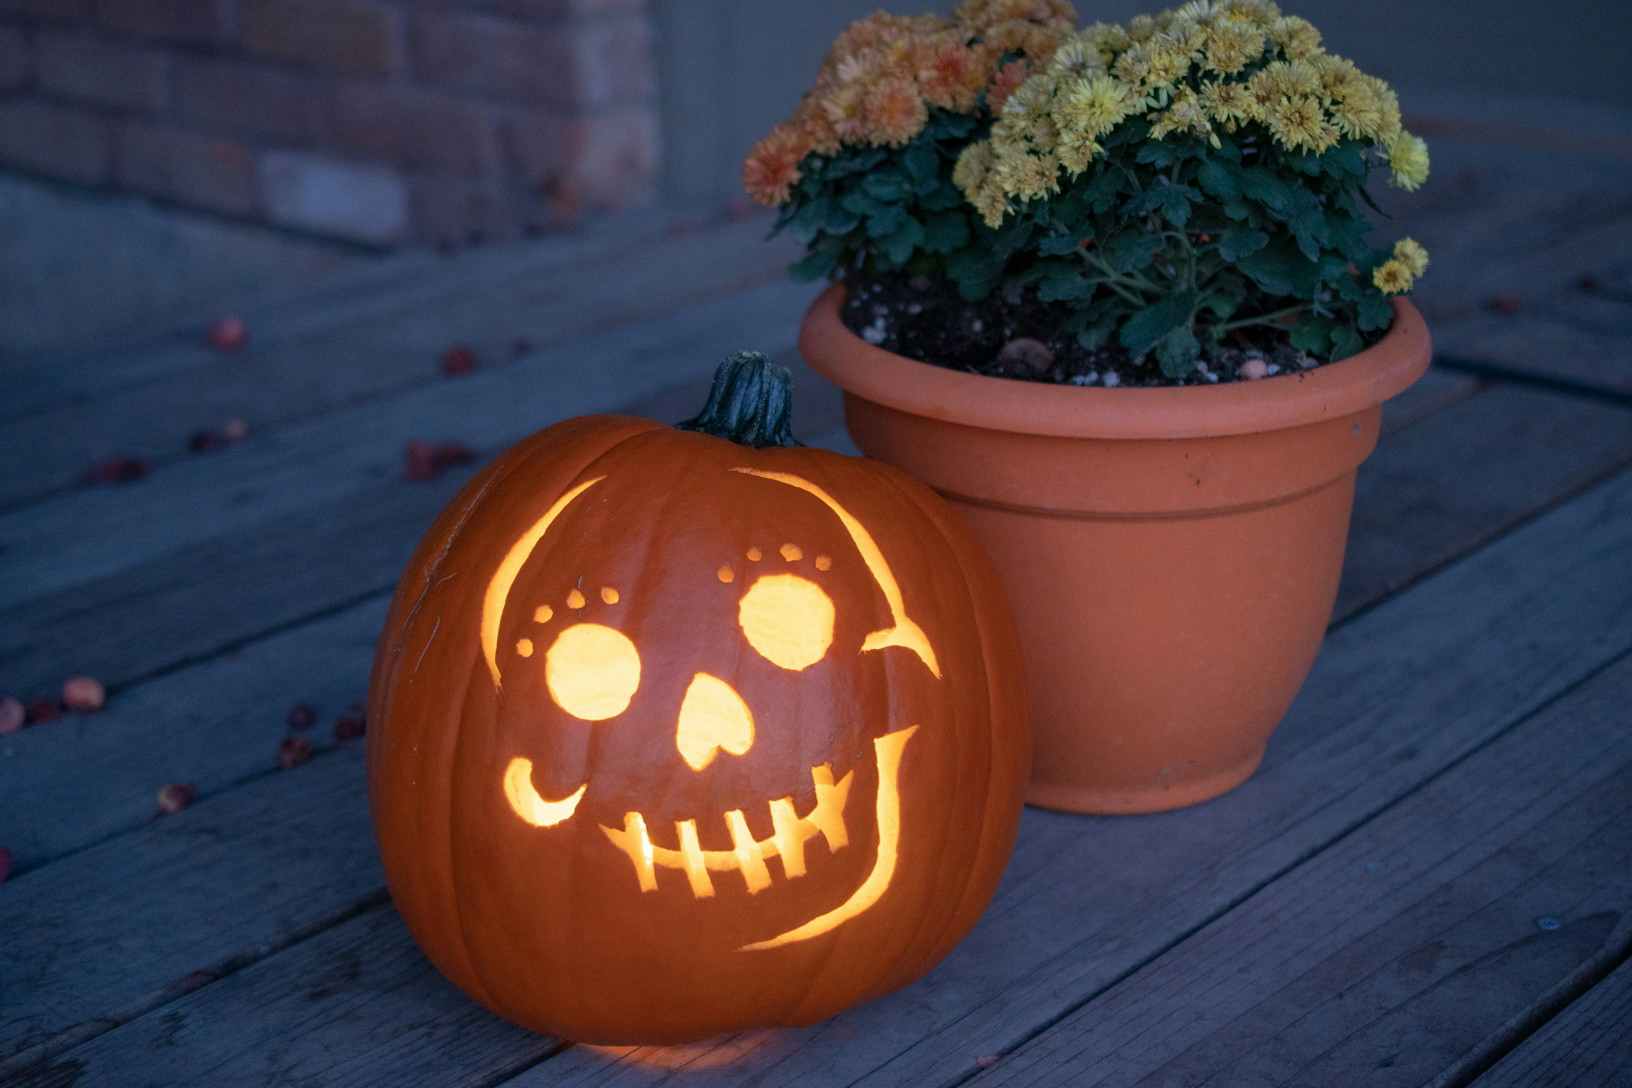 A carved pumpkin sitting on a porch.